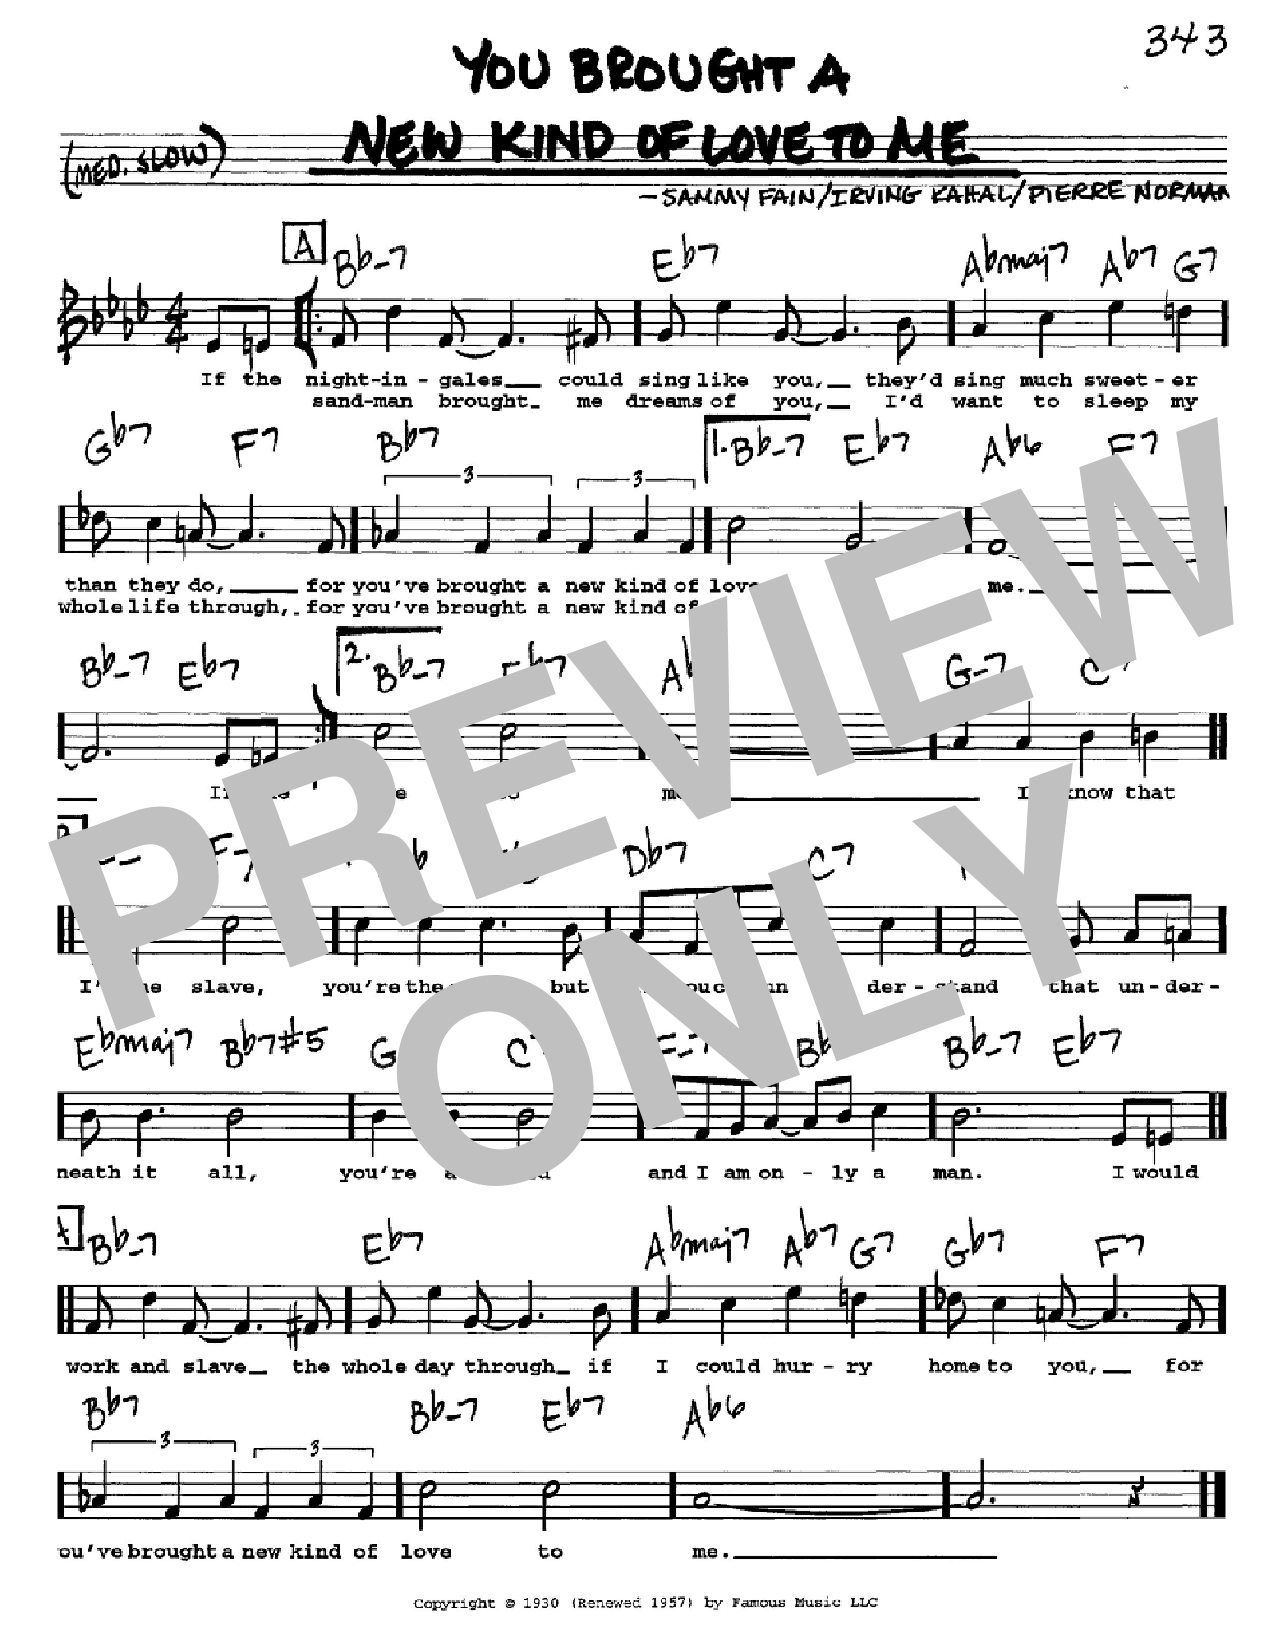 Download Frank Sinatra You Brought A New Kind Of Love To Me Sheet Music